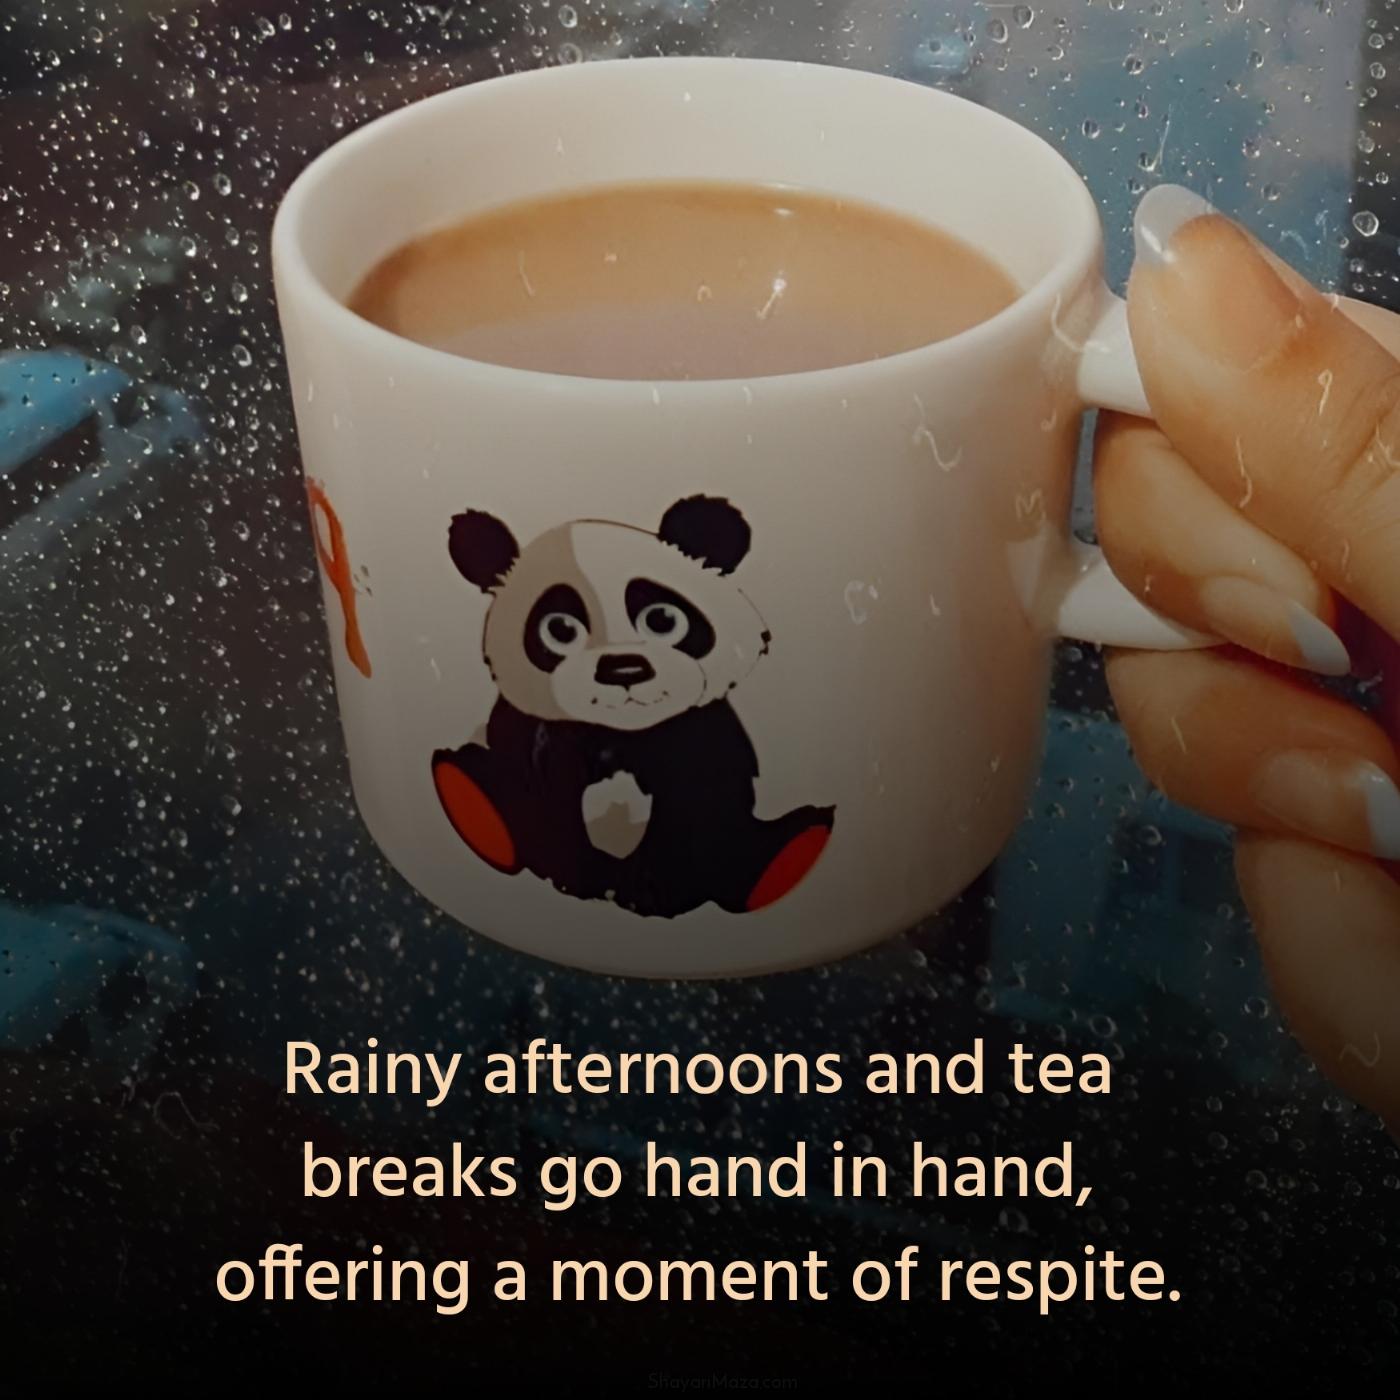 Rainy afternoons and tea breaks go hand in hand